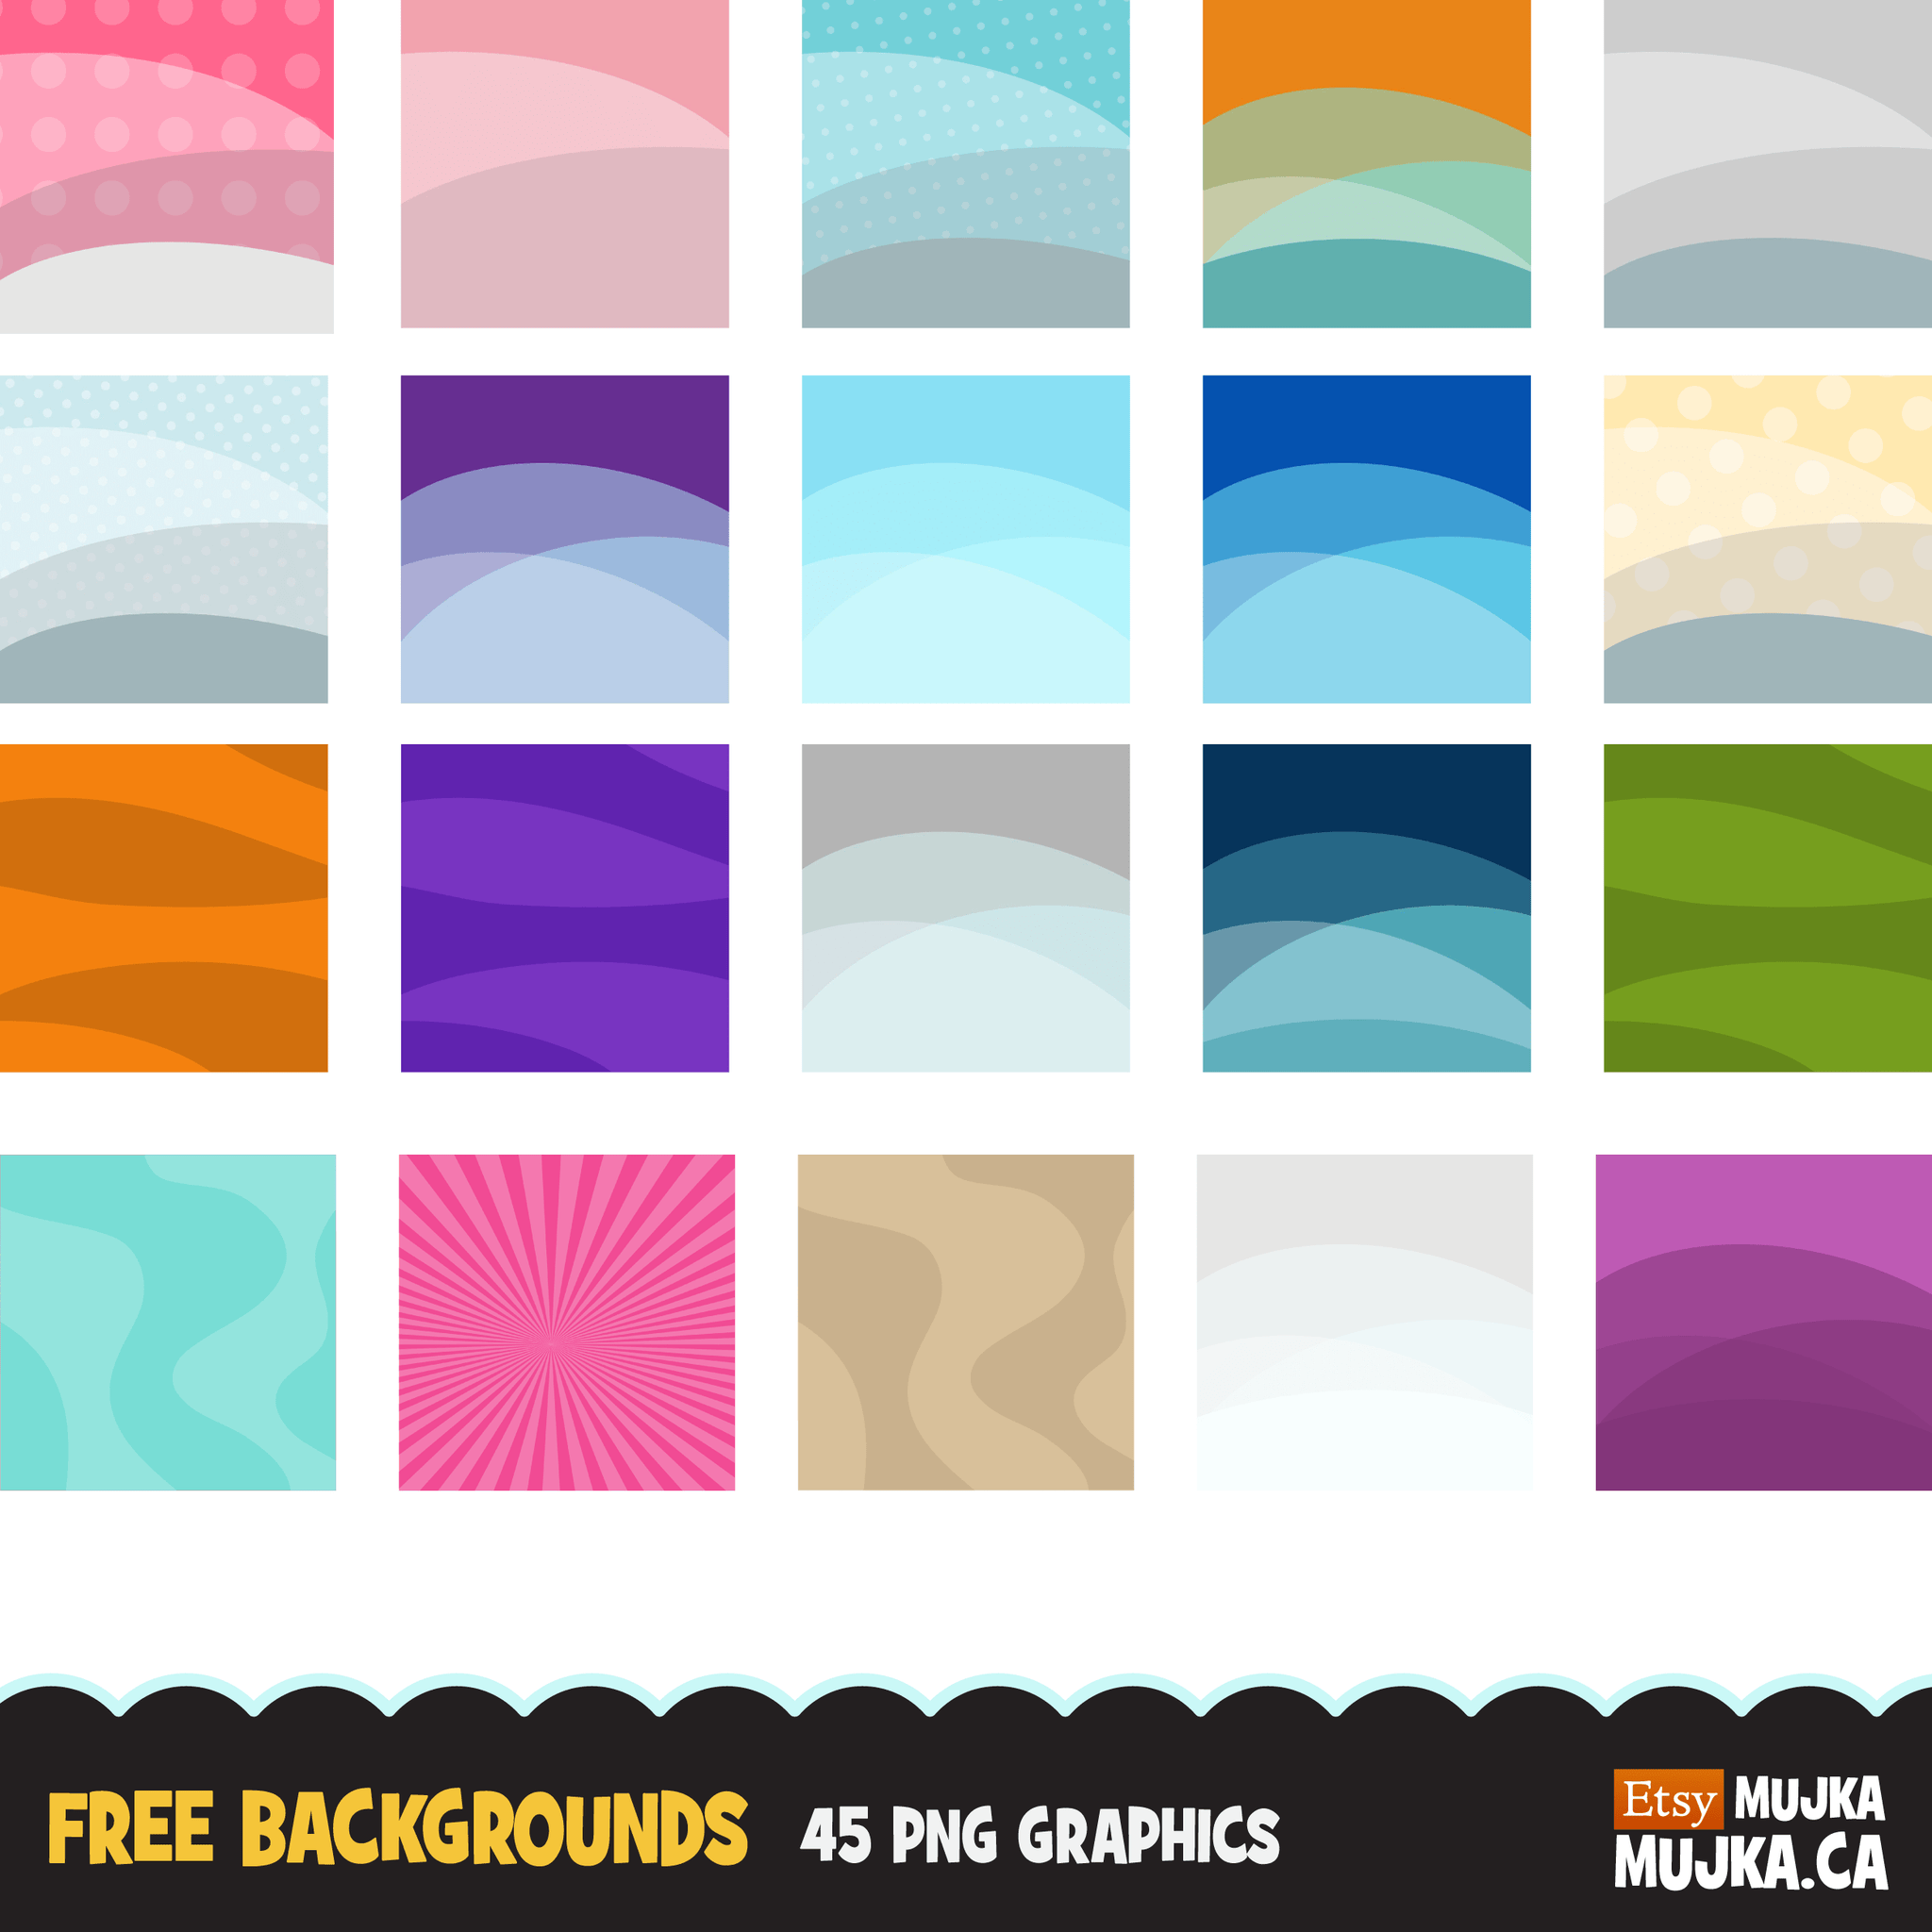 Free Backgrounds, Digital papers for Mujka cliparts